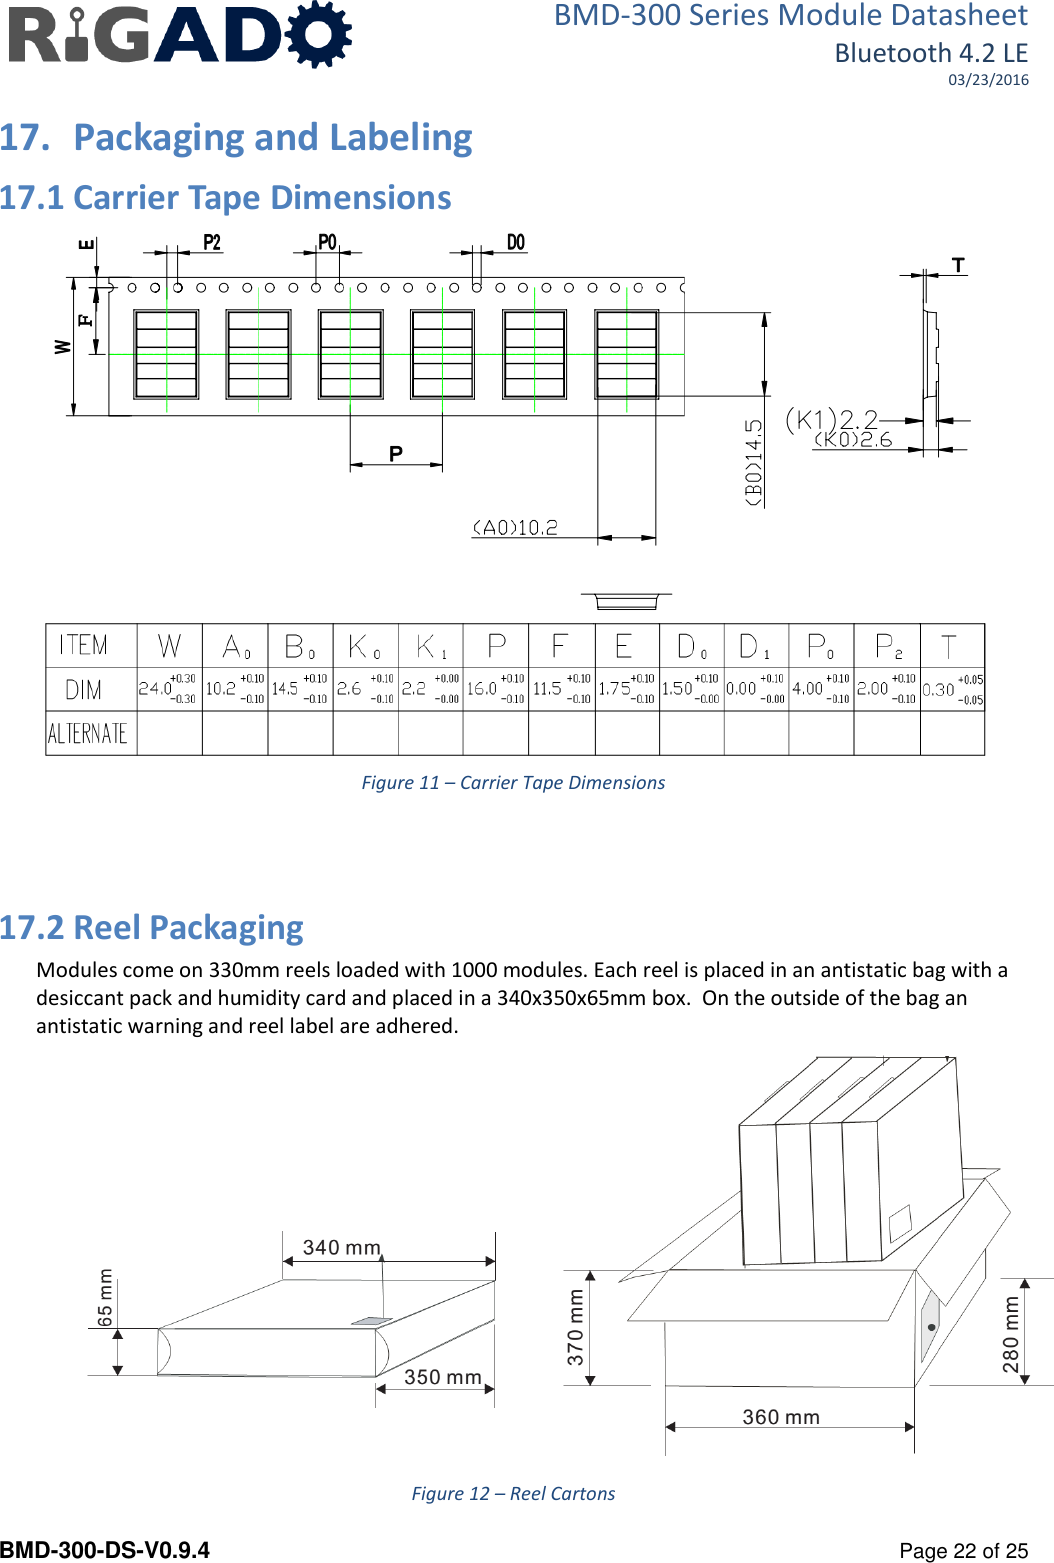 BMD-300 Series Module Datasheet Bluetooth 4.2 LE 03/23/2016  BMD-300-DS-V0.9.4      Page 22 of 25 17. Packaging and Labeling 17.1 Carrier Tape Dimensions  Figure 11 – Carrier Tape Dimensions    17.2 Reel Packaging Modules come on 330mm reels loaded with 1000 modules. Each reel is placed in an antistatic bag with a desiccant pack and humidity card and placed in a 340x350x65mm box.  On the outside of the bag an antistatic warning and reel label are adhered.  Figure 12 – Reel Cartons 